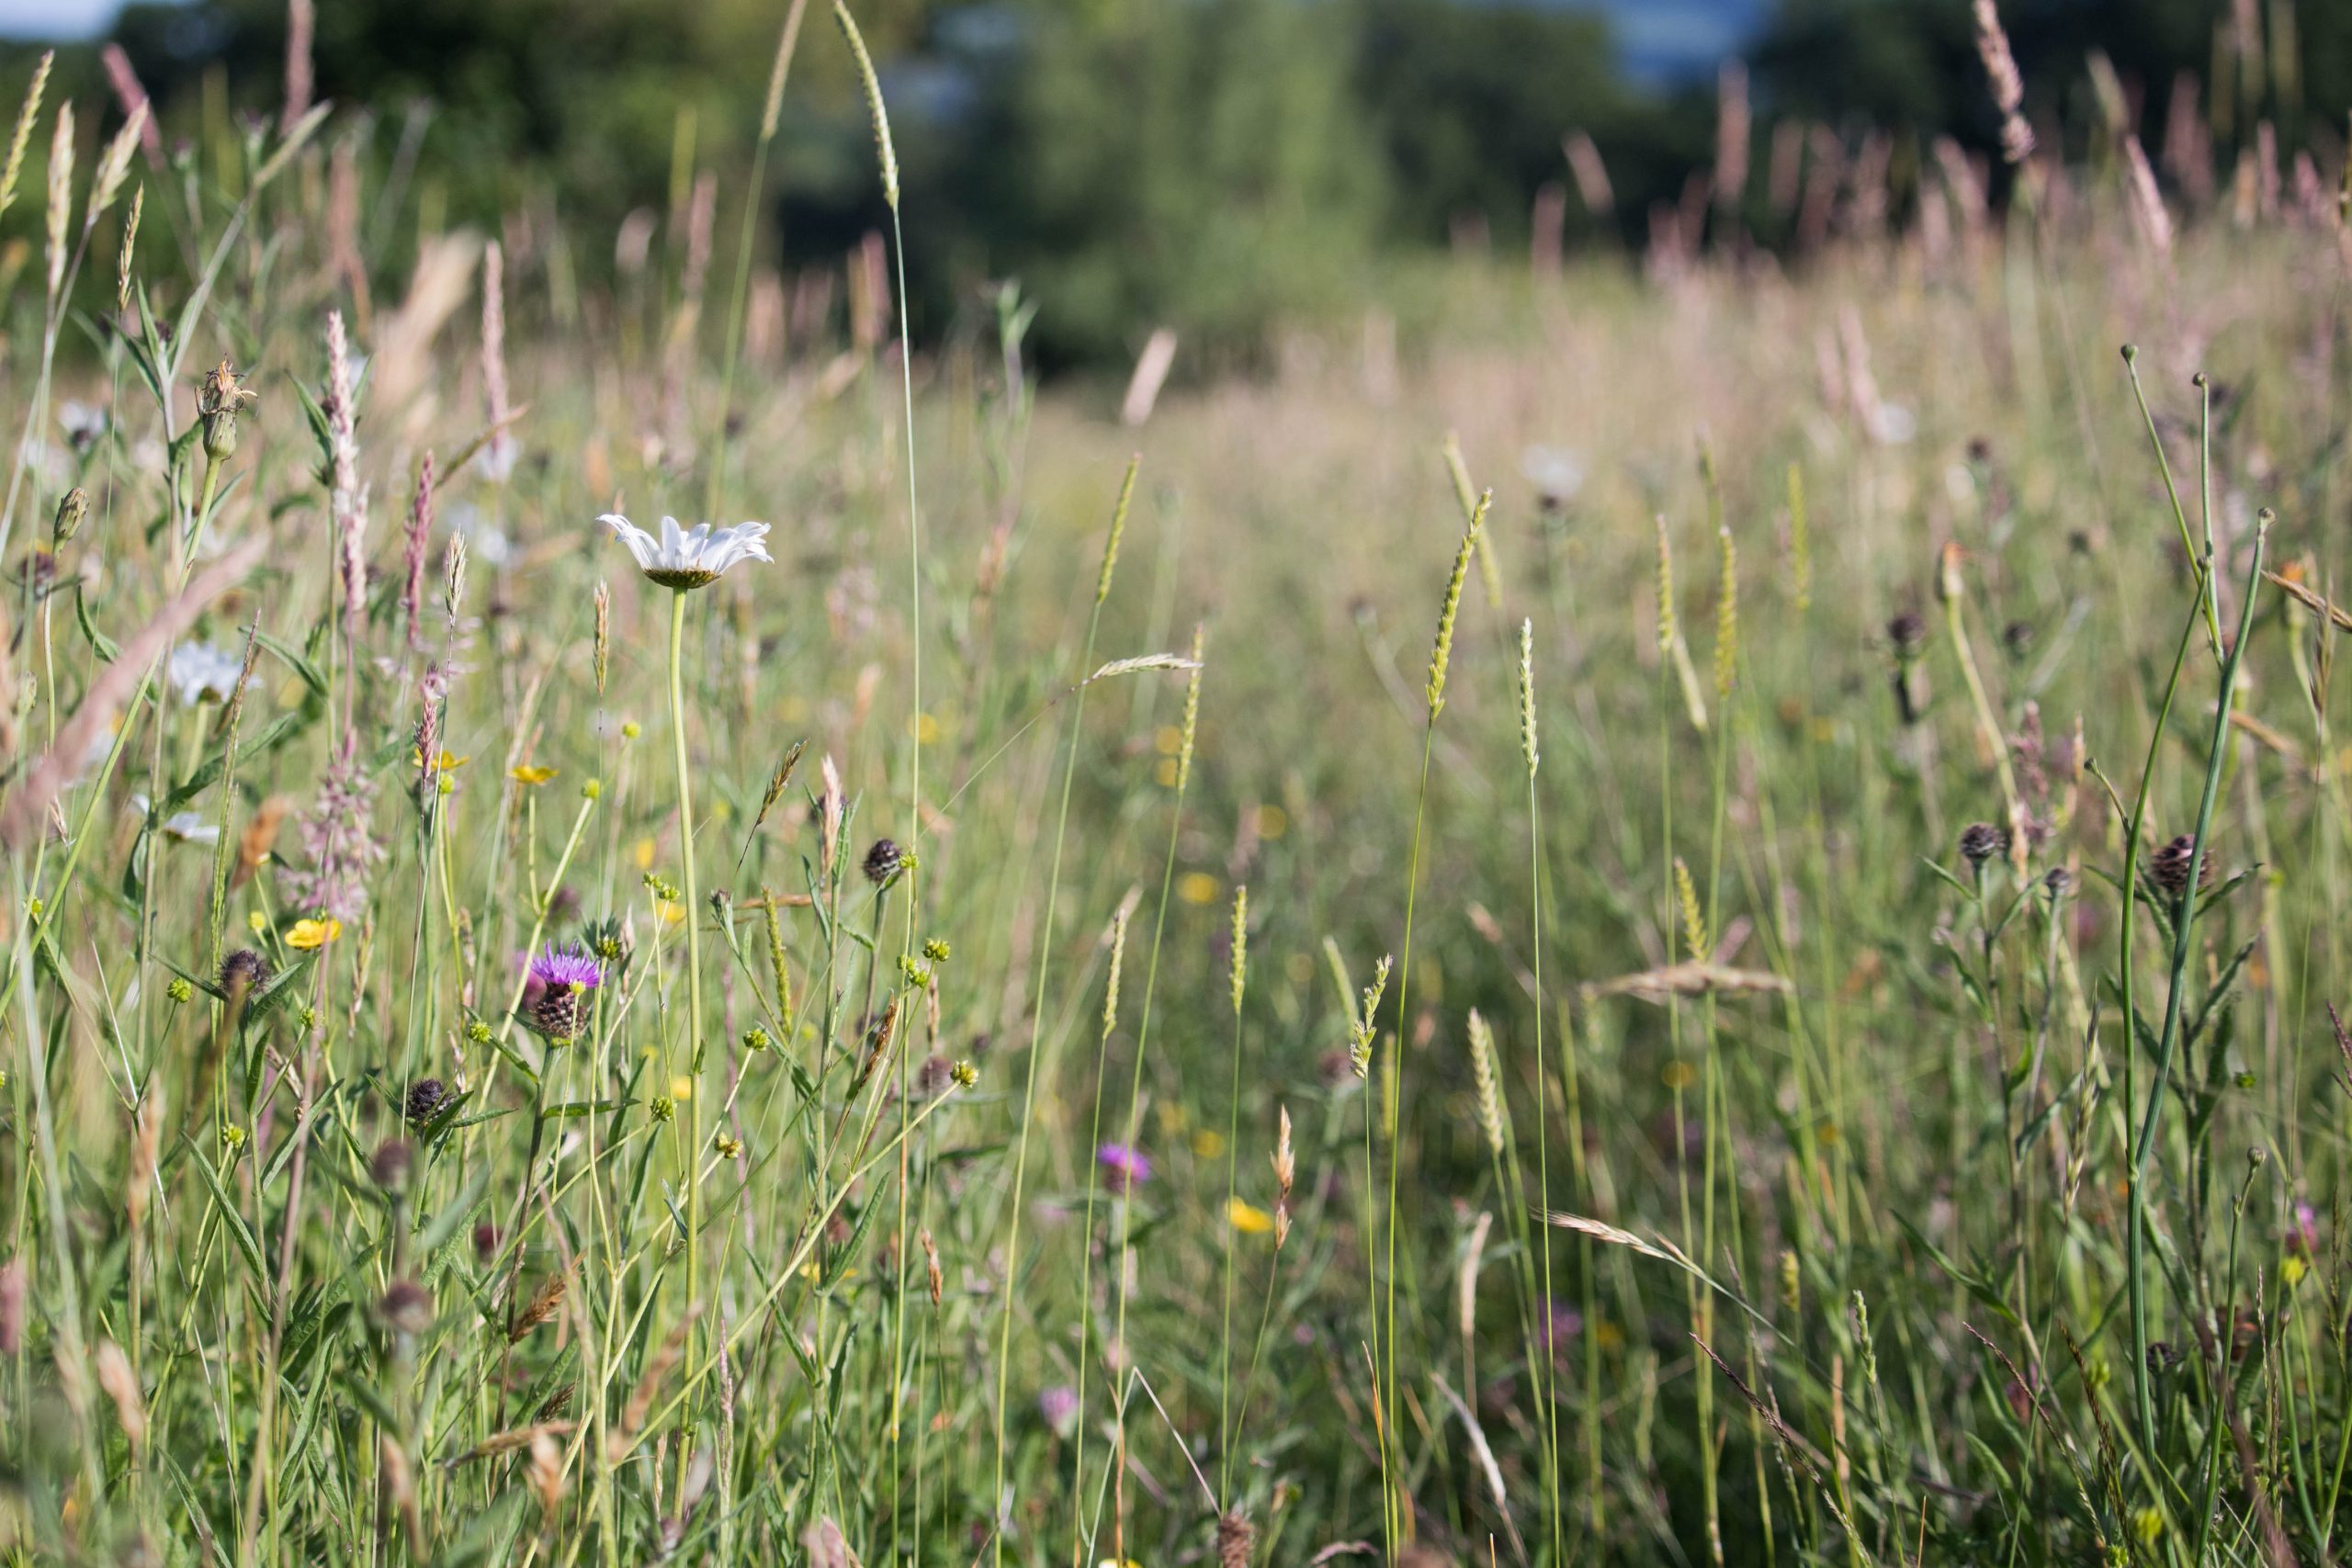 Greater Gwent Nature Recovery Action Plan